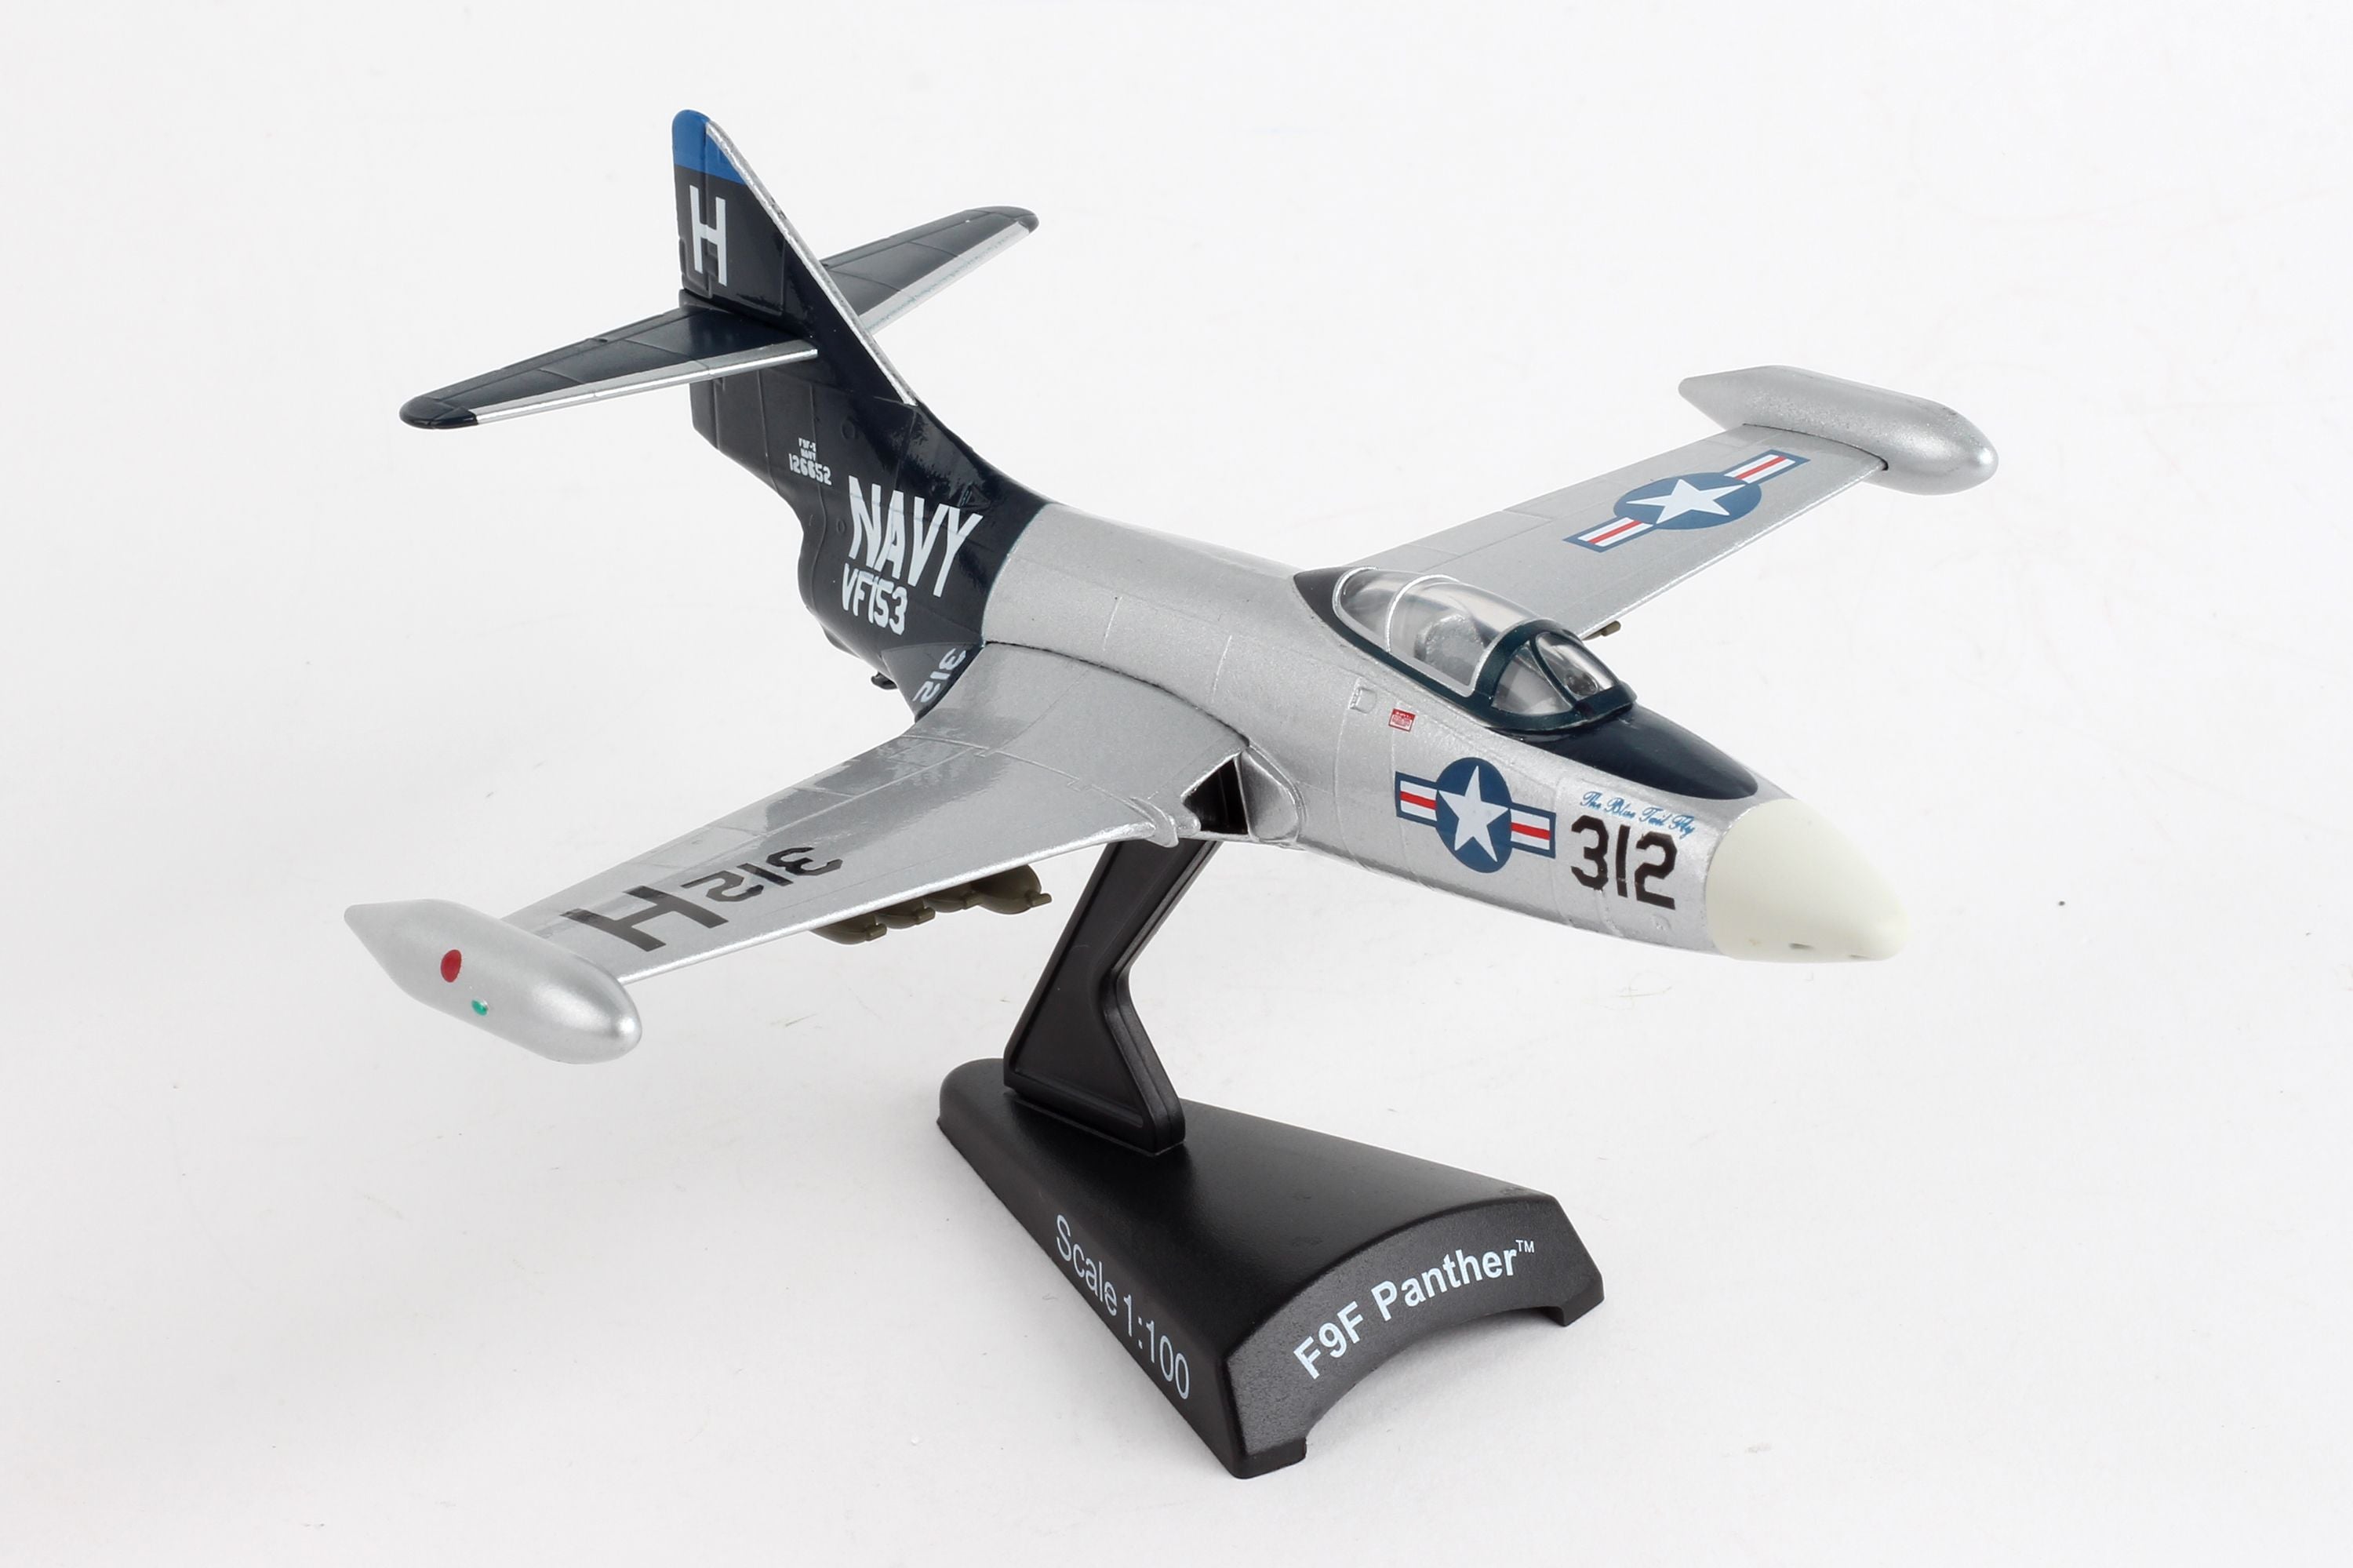 Panther Dieca Pang\'s - NAVY Tail VF-153 Flies- and Grumman Models F9F - Hobbies – 1/100 Blue Scale